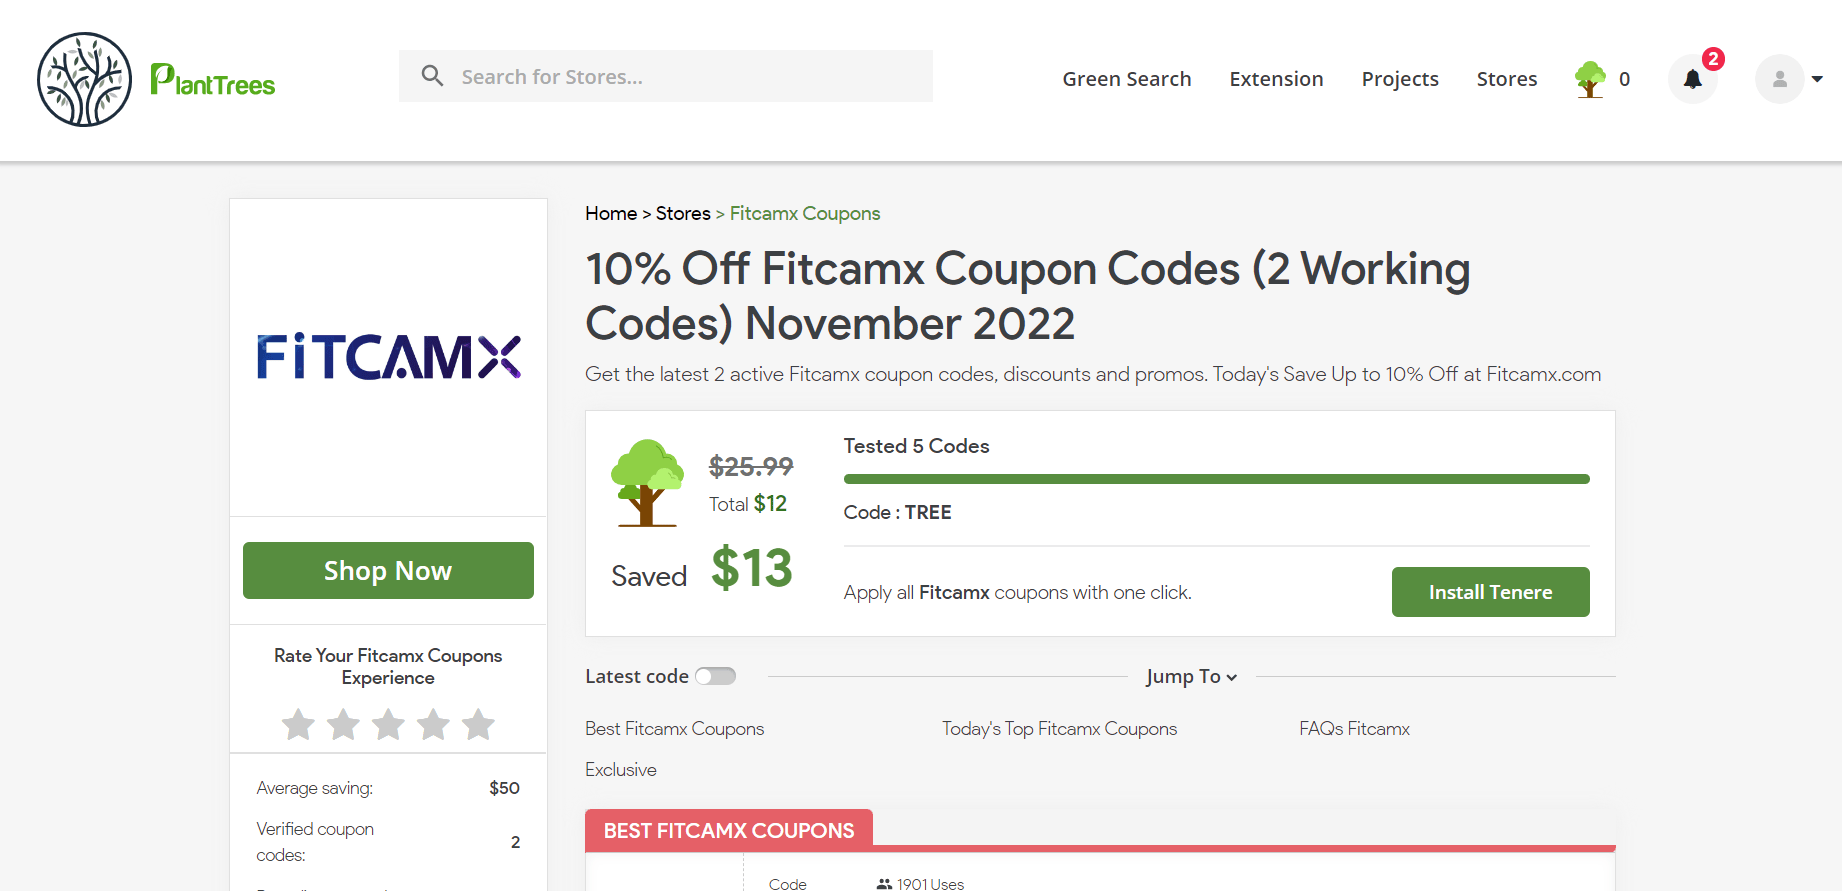 How to use Fitcamx coupon 2